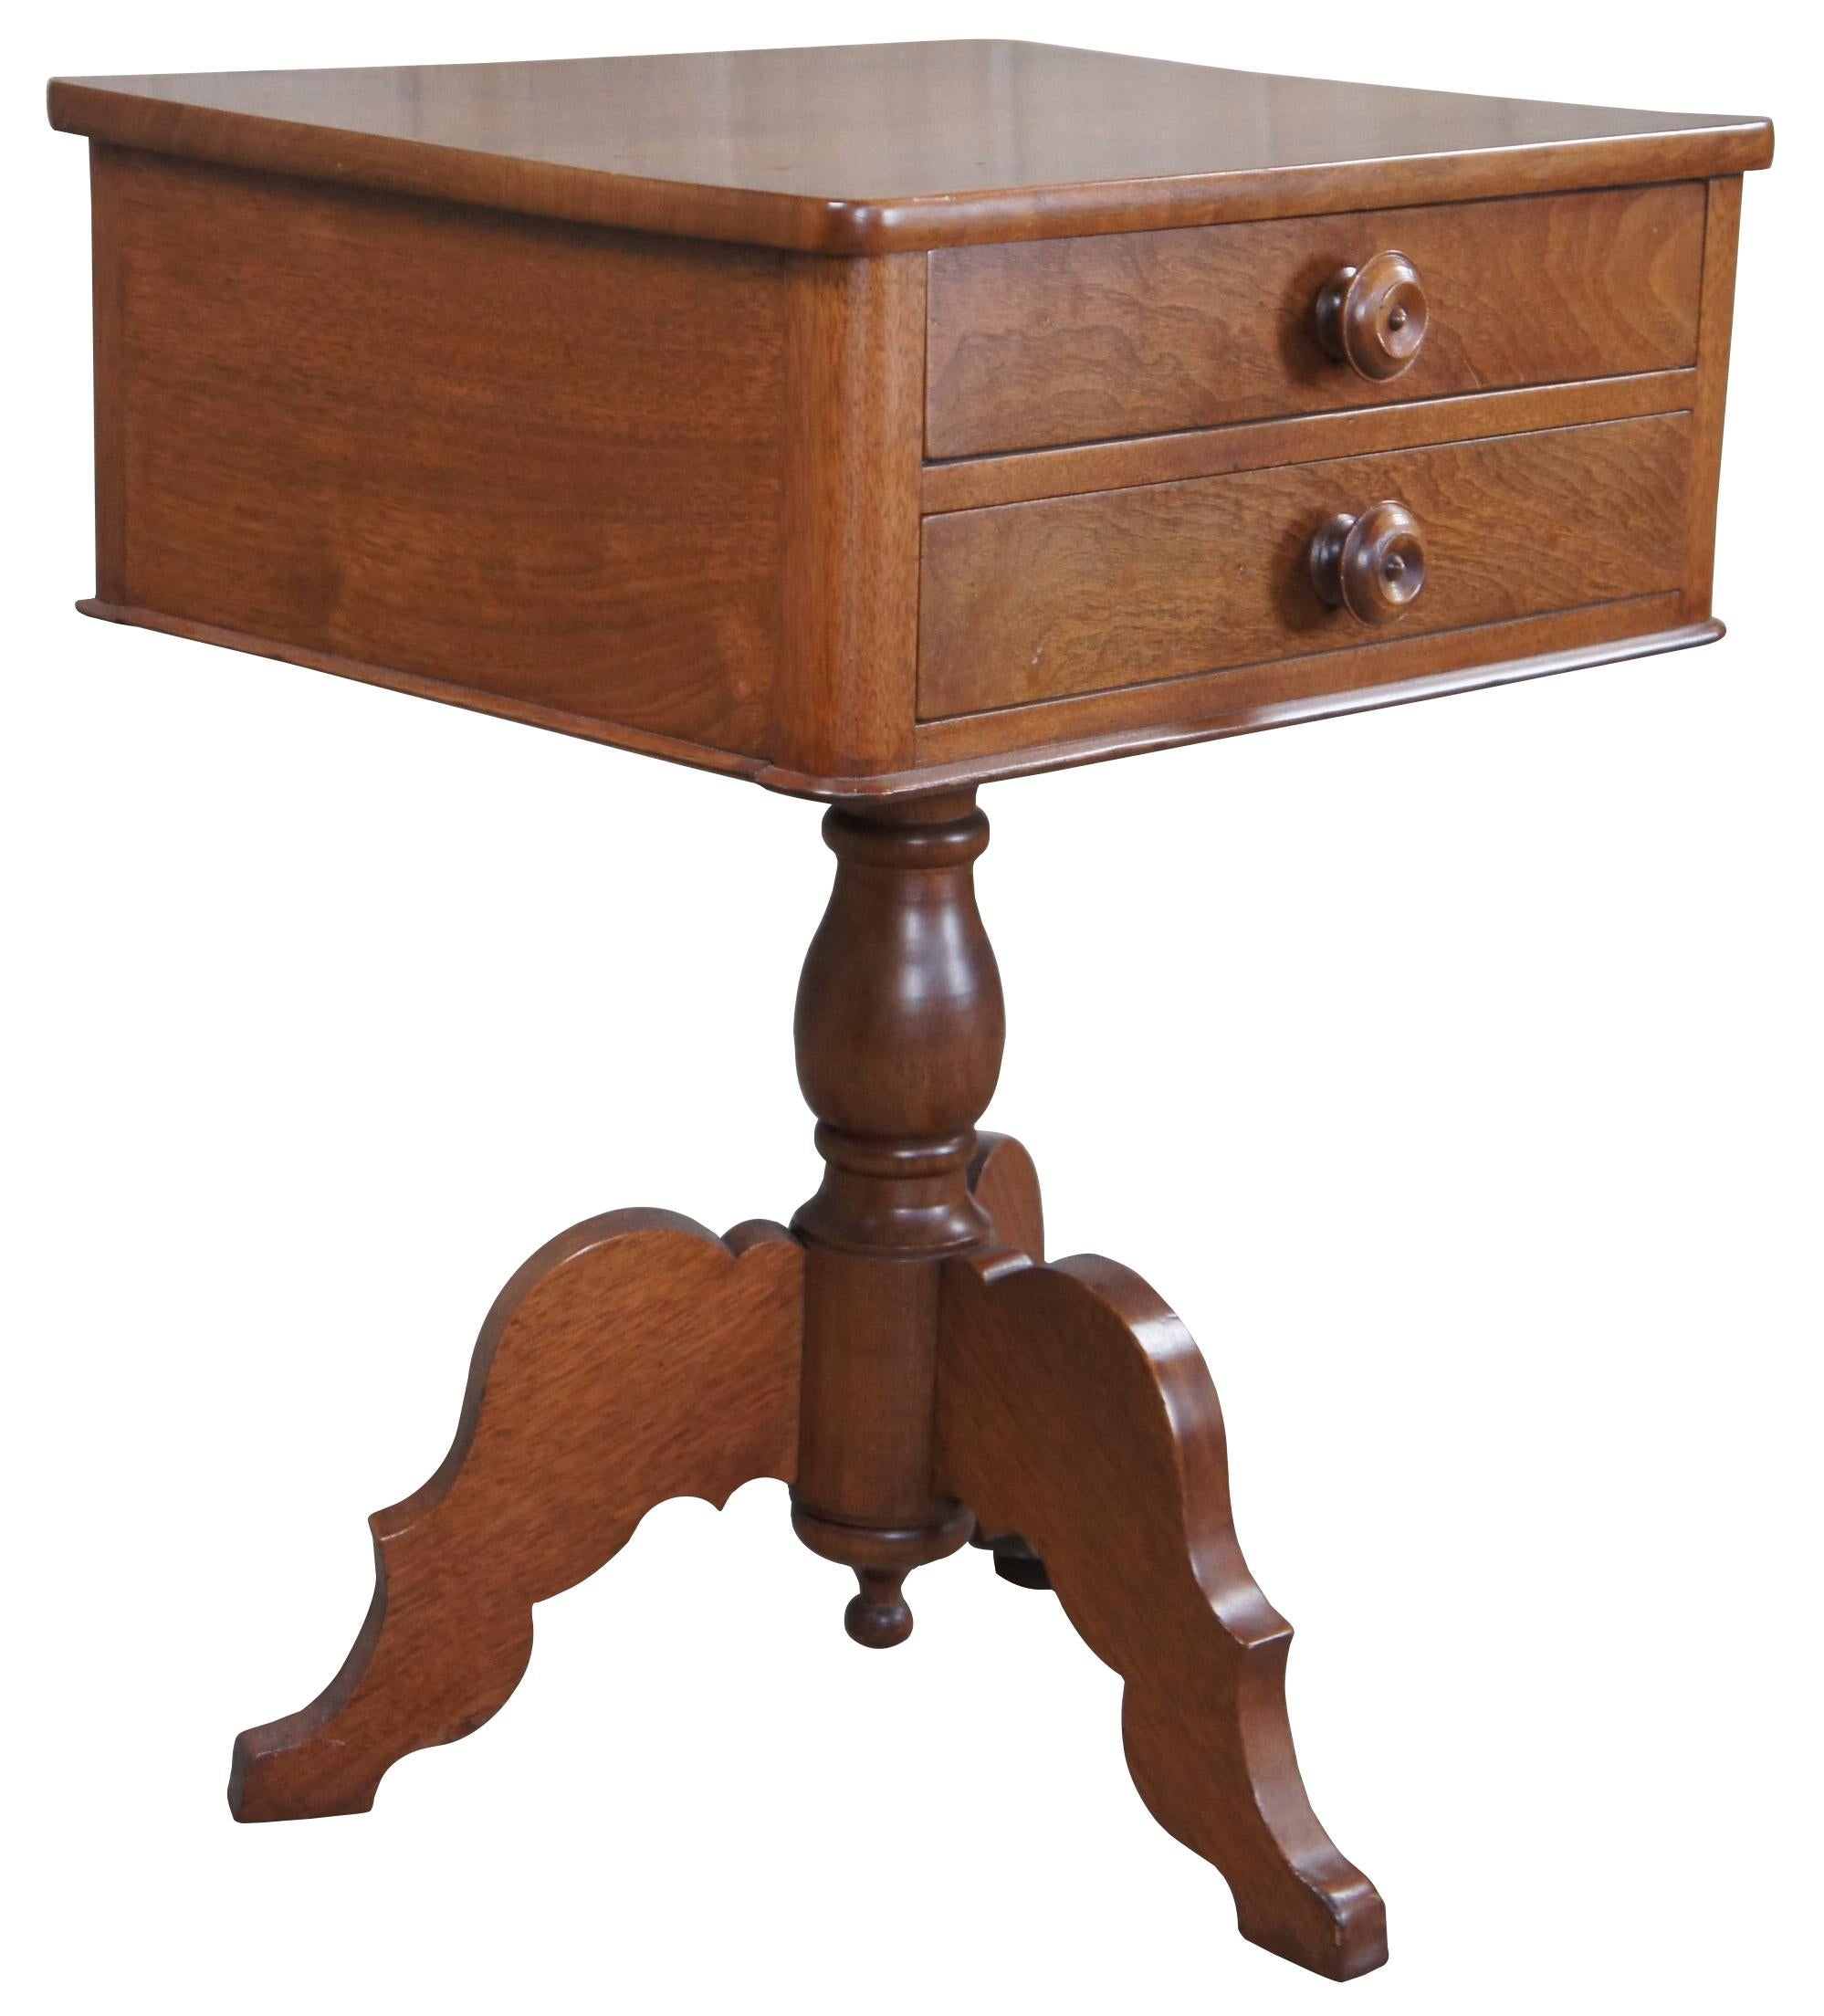 Antique 19th Century American Empire Walnut Parlor Side Accent Table In Good Condition For Sale In Dayton, OH